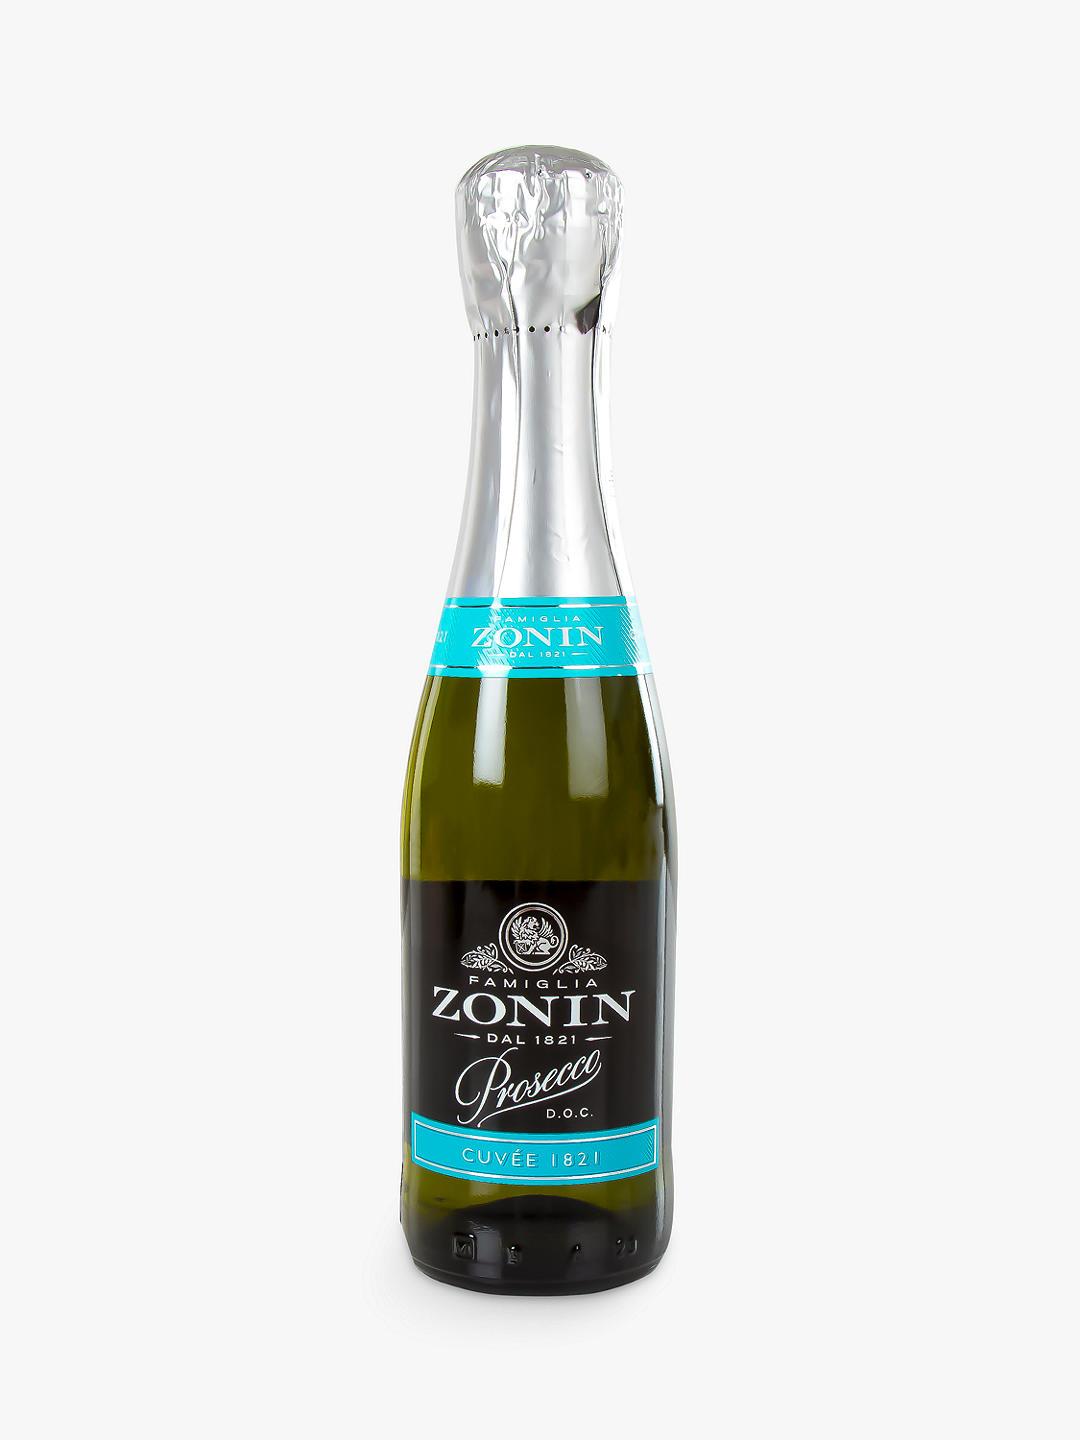 Zonin Prosecco (20cl) Gift Items & Supplies